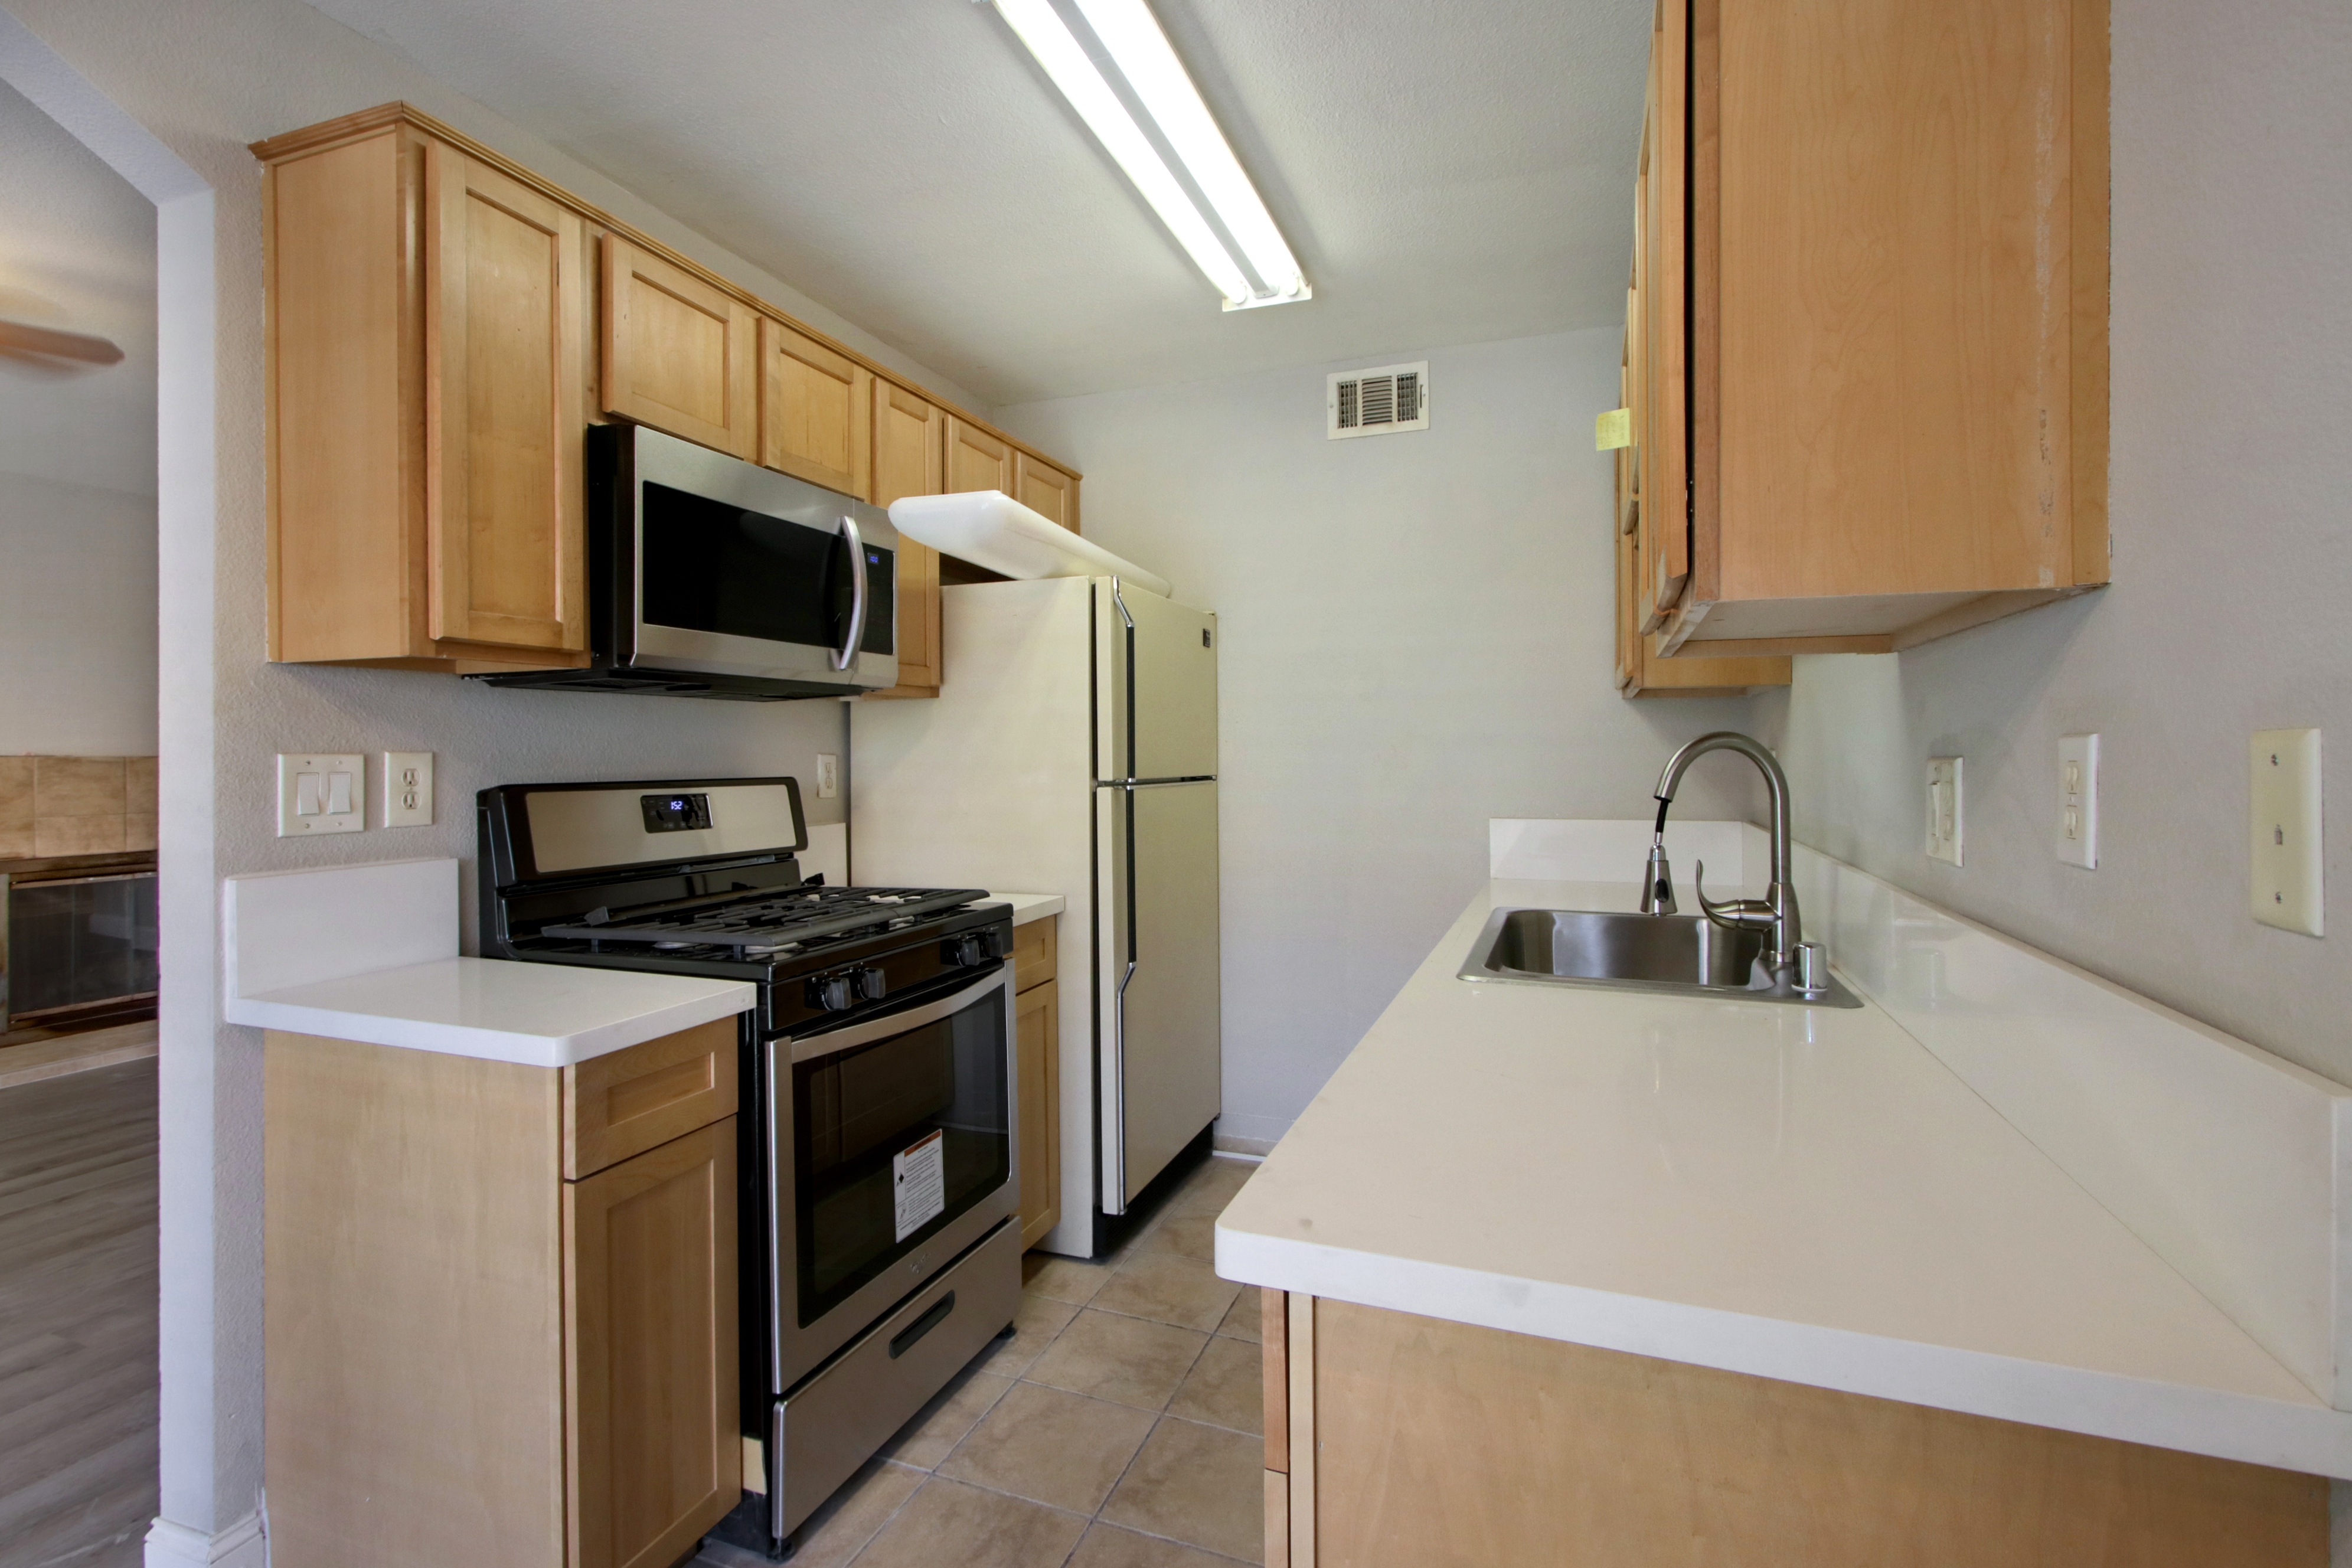 5001 Bremner Lane Unit 1 - Sacramento -  presented by James Tan MBA Broker/Realtor - Bethany Real Estate and Investments - One of the best real estate agent in Elk Grove